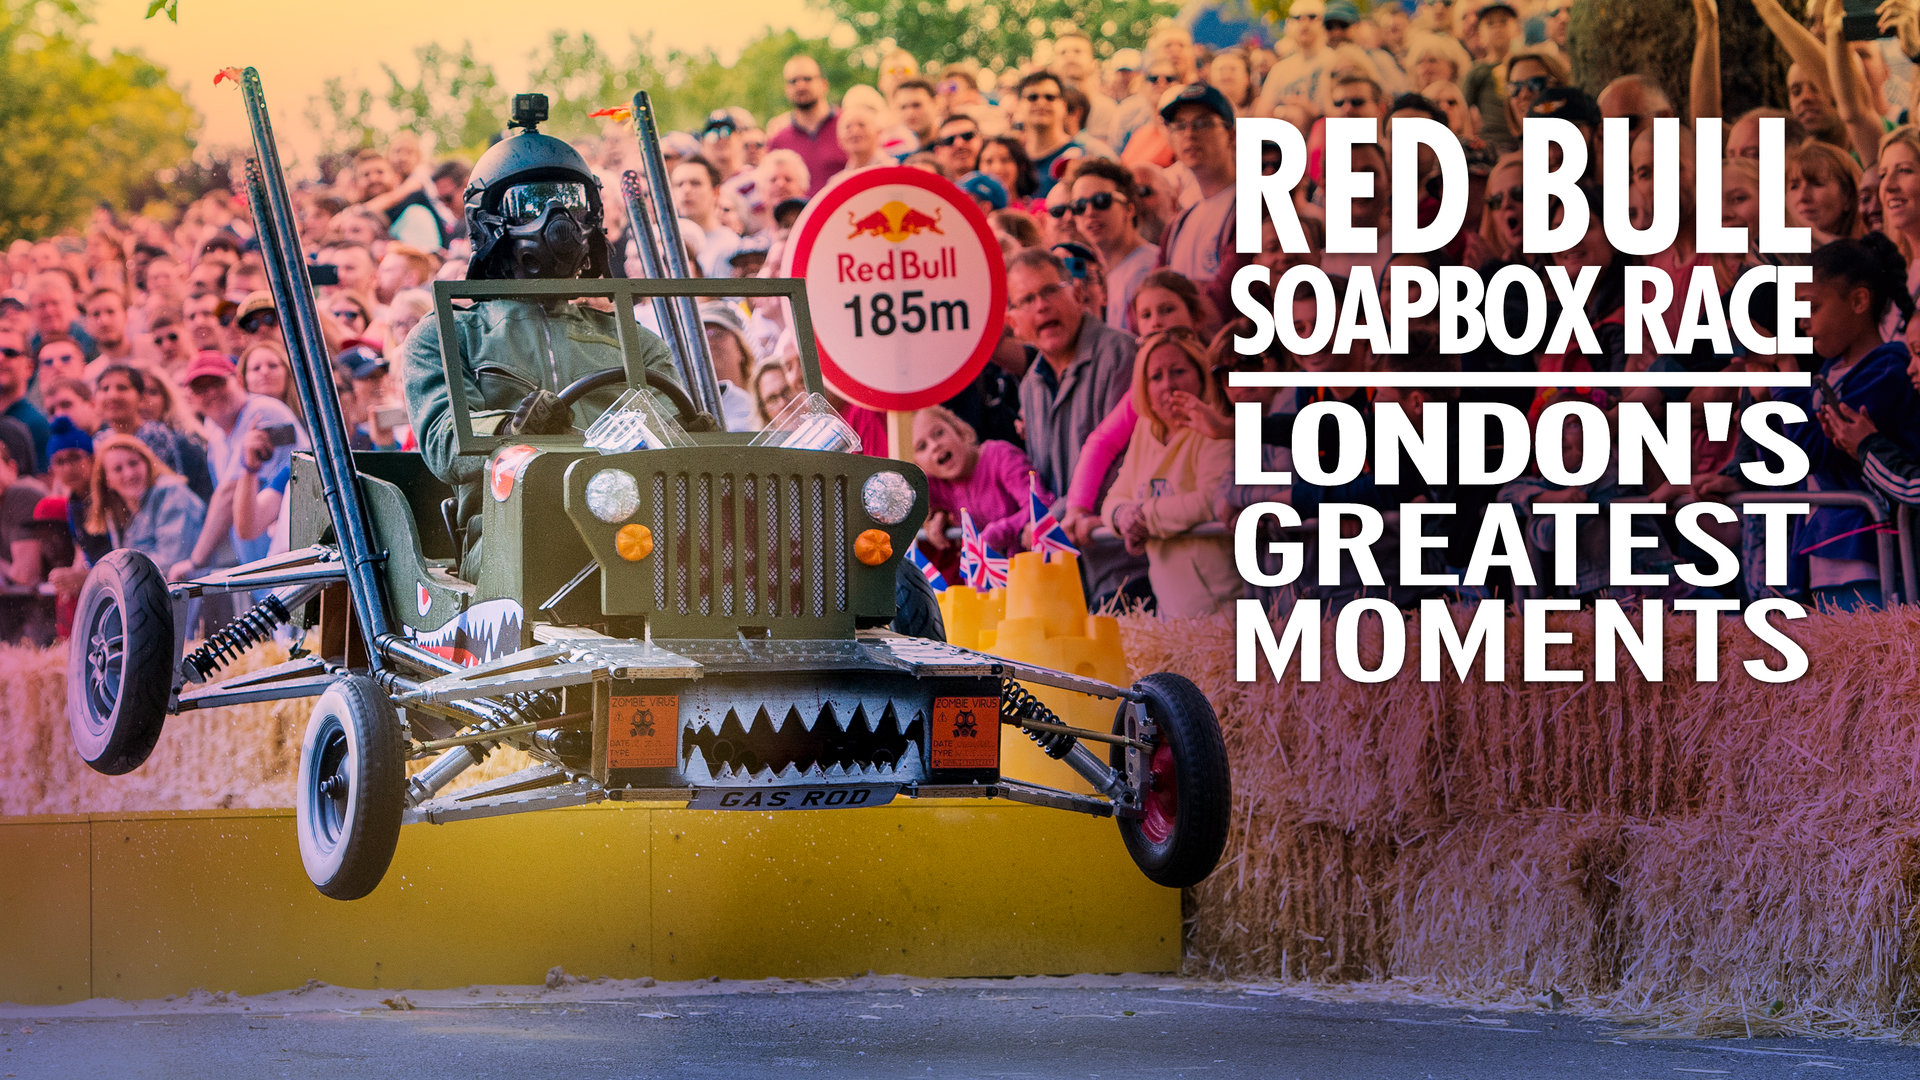 How to watch Red Bull Soapbox Race London's Greatest Moments UKTV Play